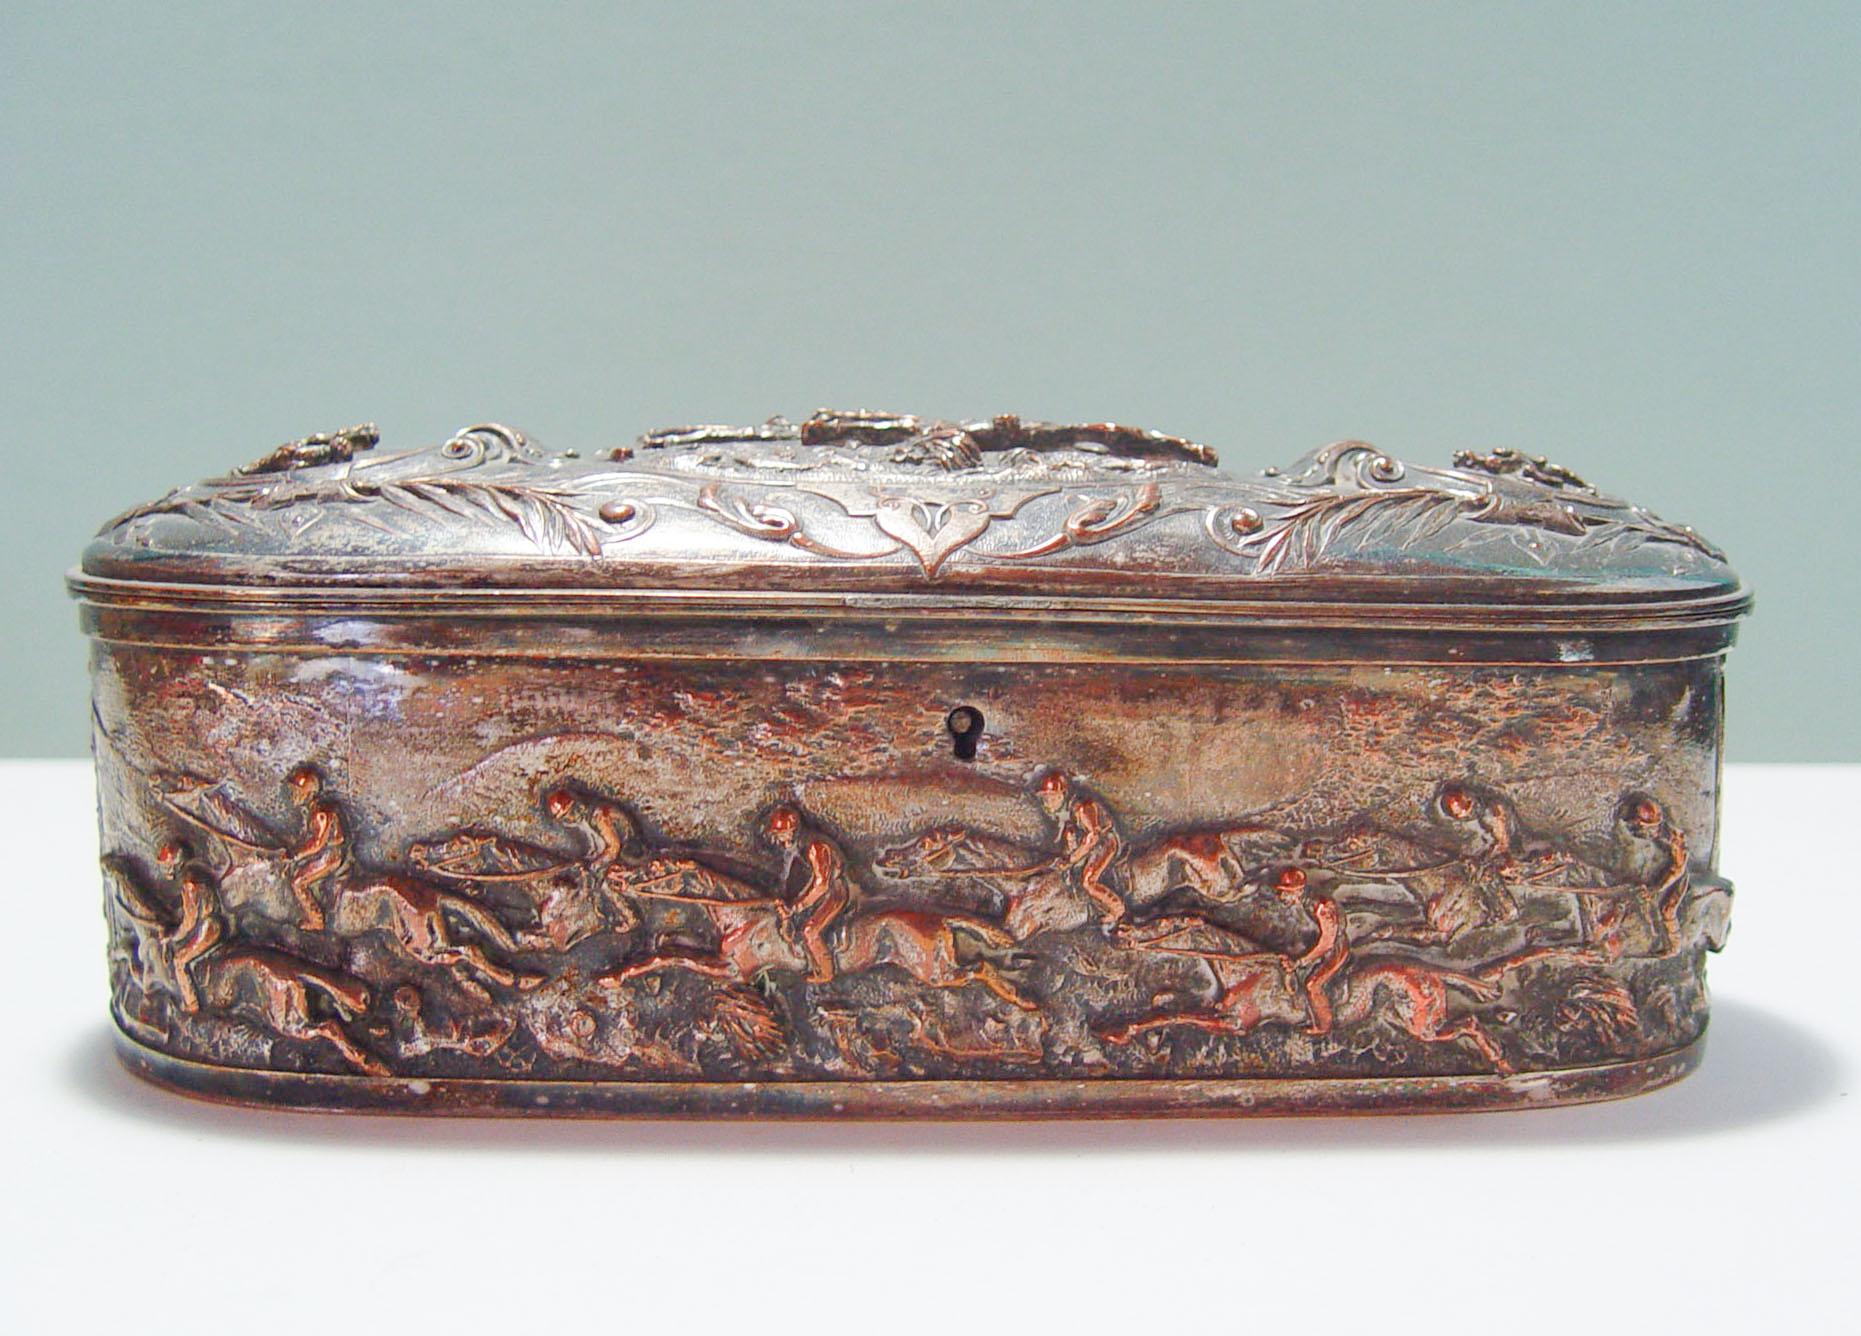 Antique french silver plate over copper jewelry casket with very high relief horse racing equine motif all around, circa 1890's. Interior is tufted purple silk, had feet at one time, since removed. Marked with B and Clover on bottom. French silver